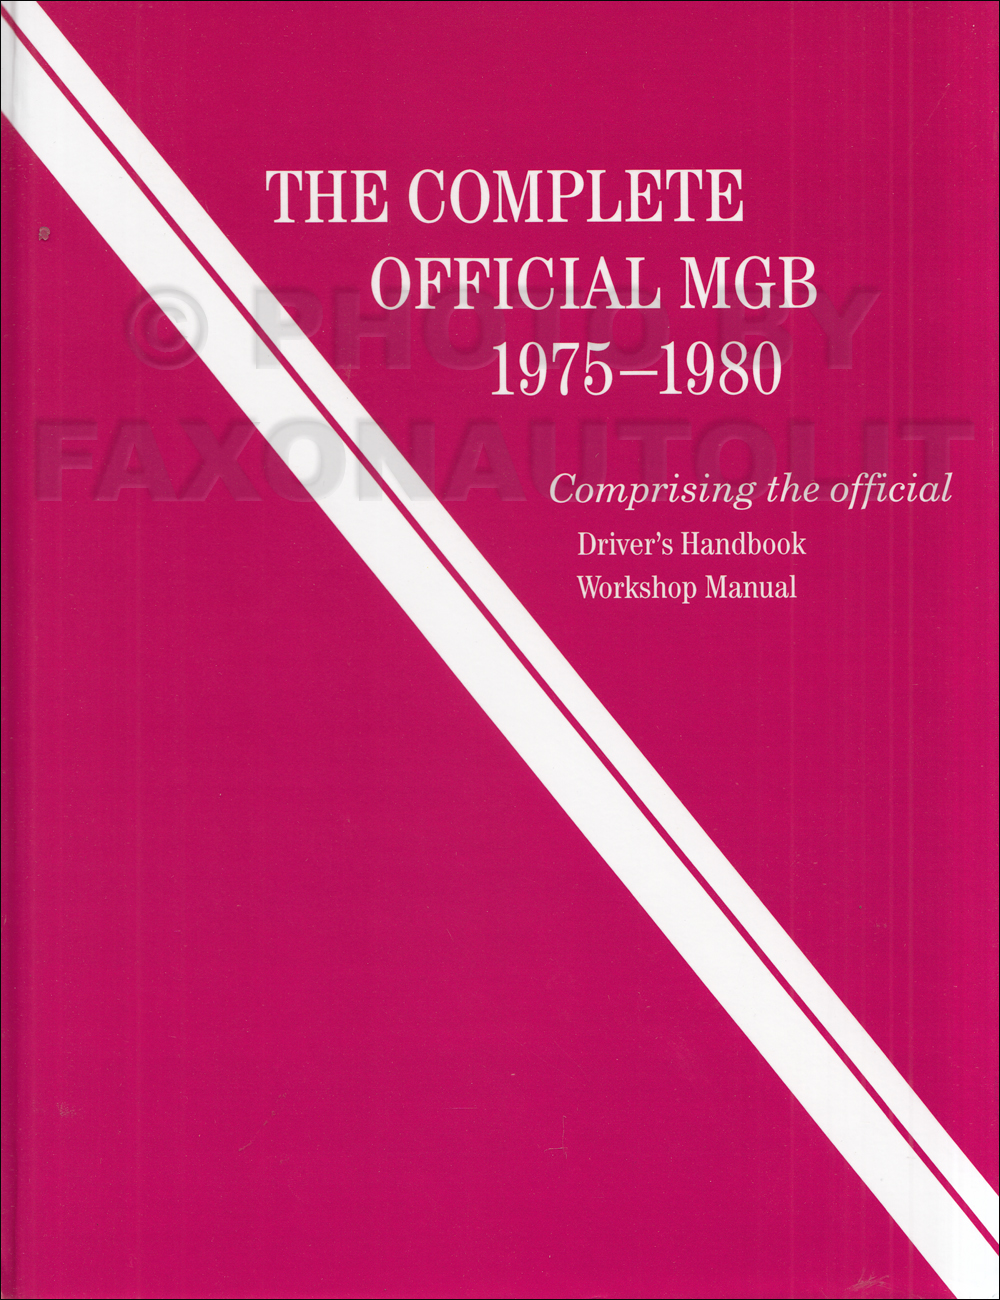 "The Complete Official MGB 1975-1980" Bentley Repair Manual